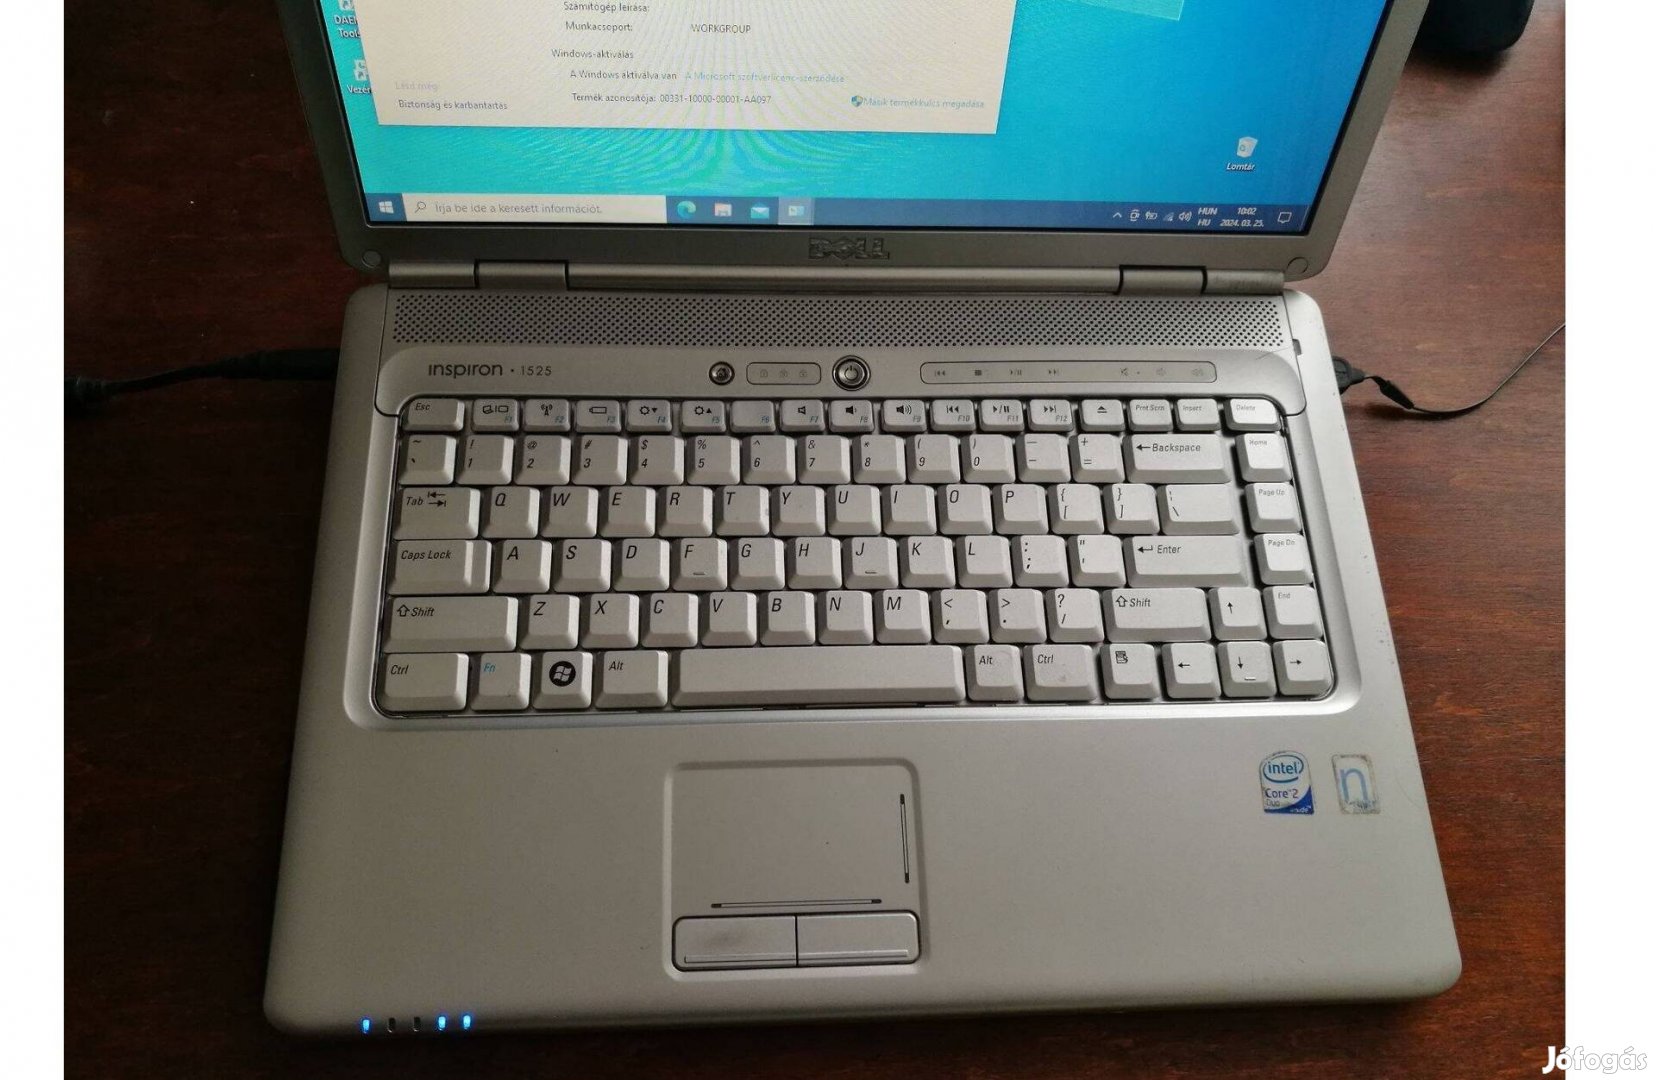 Dell Inspiron 1525 notebook